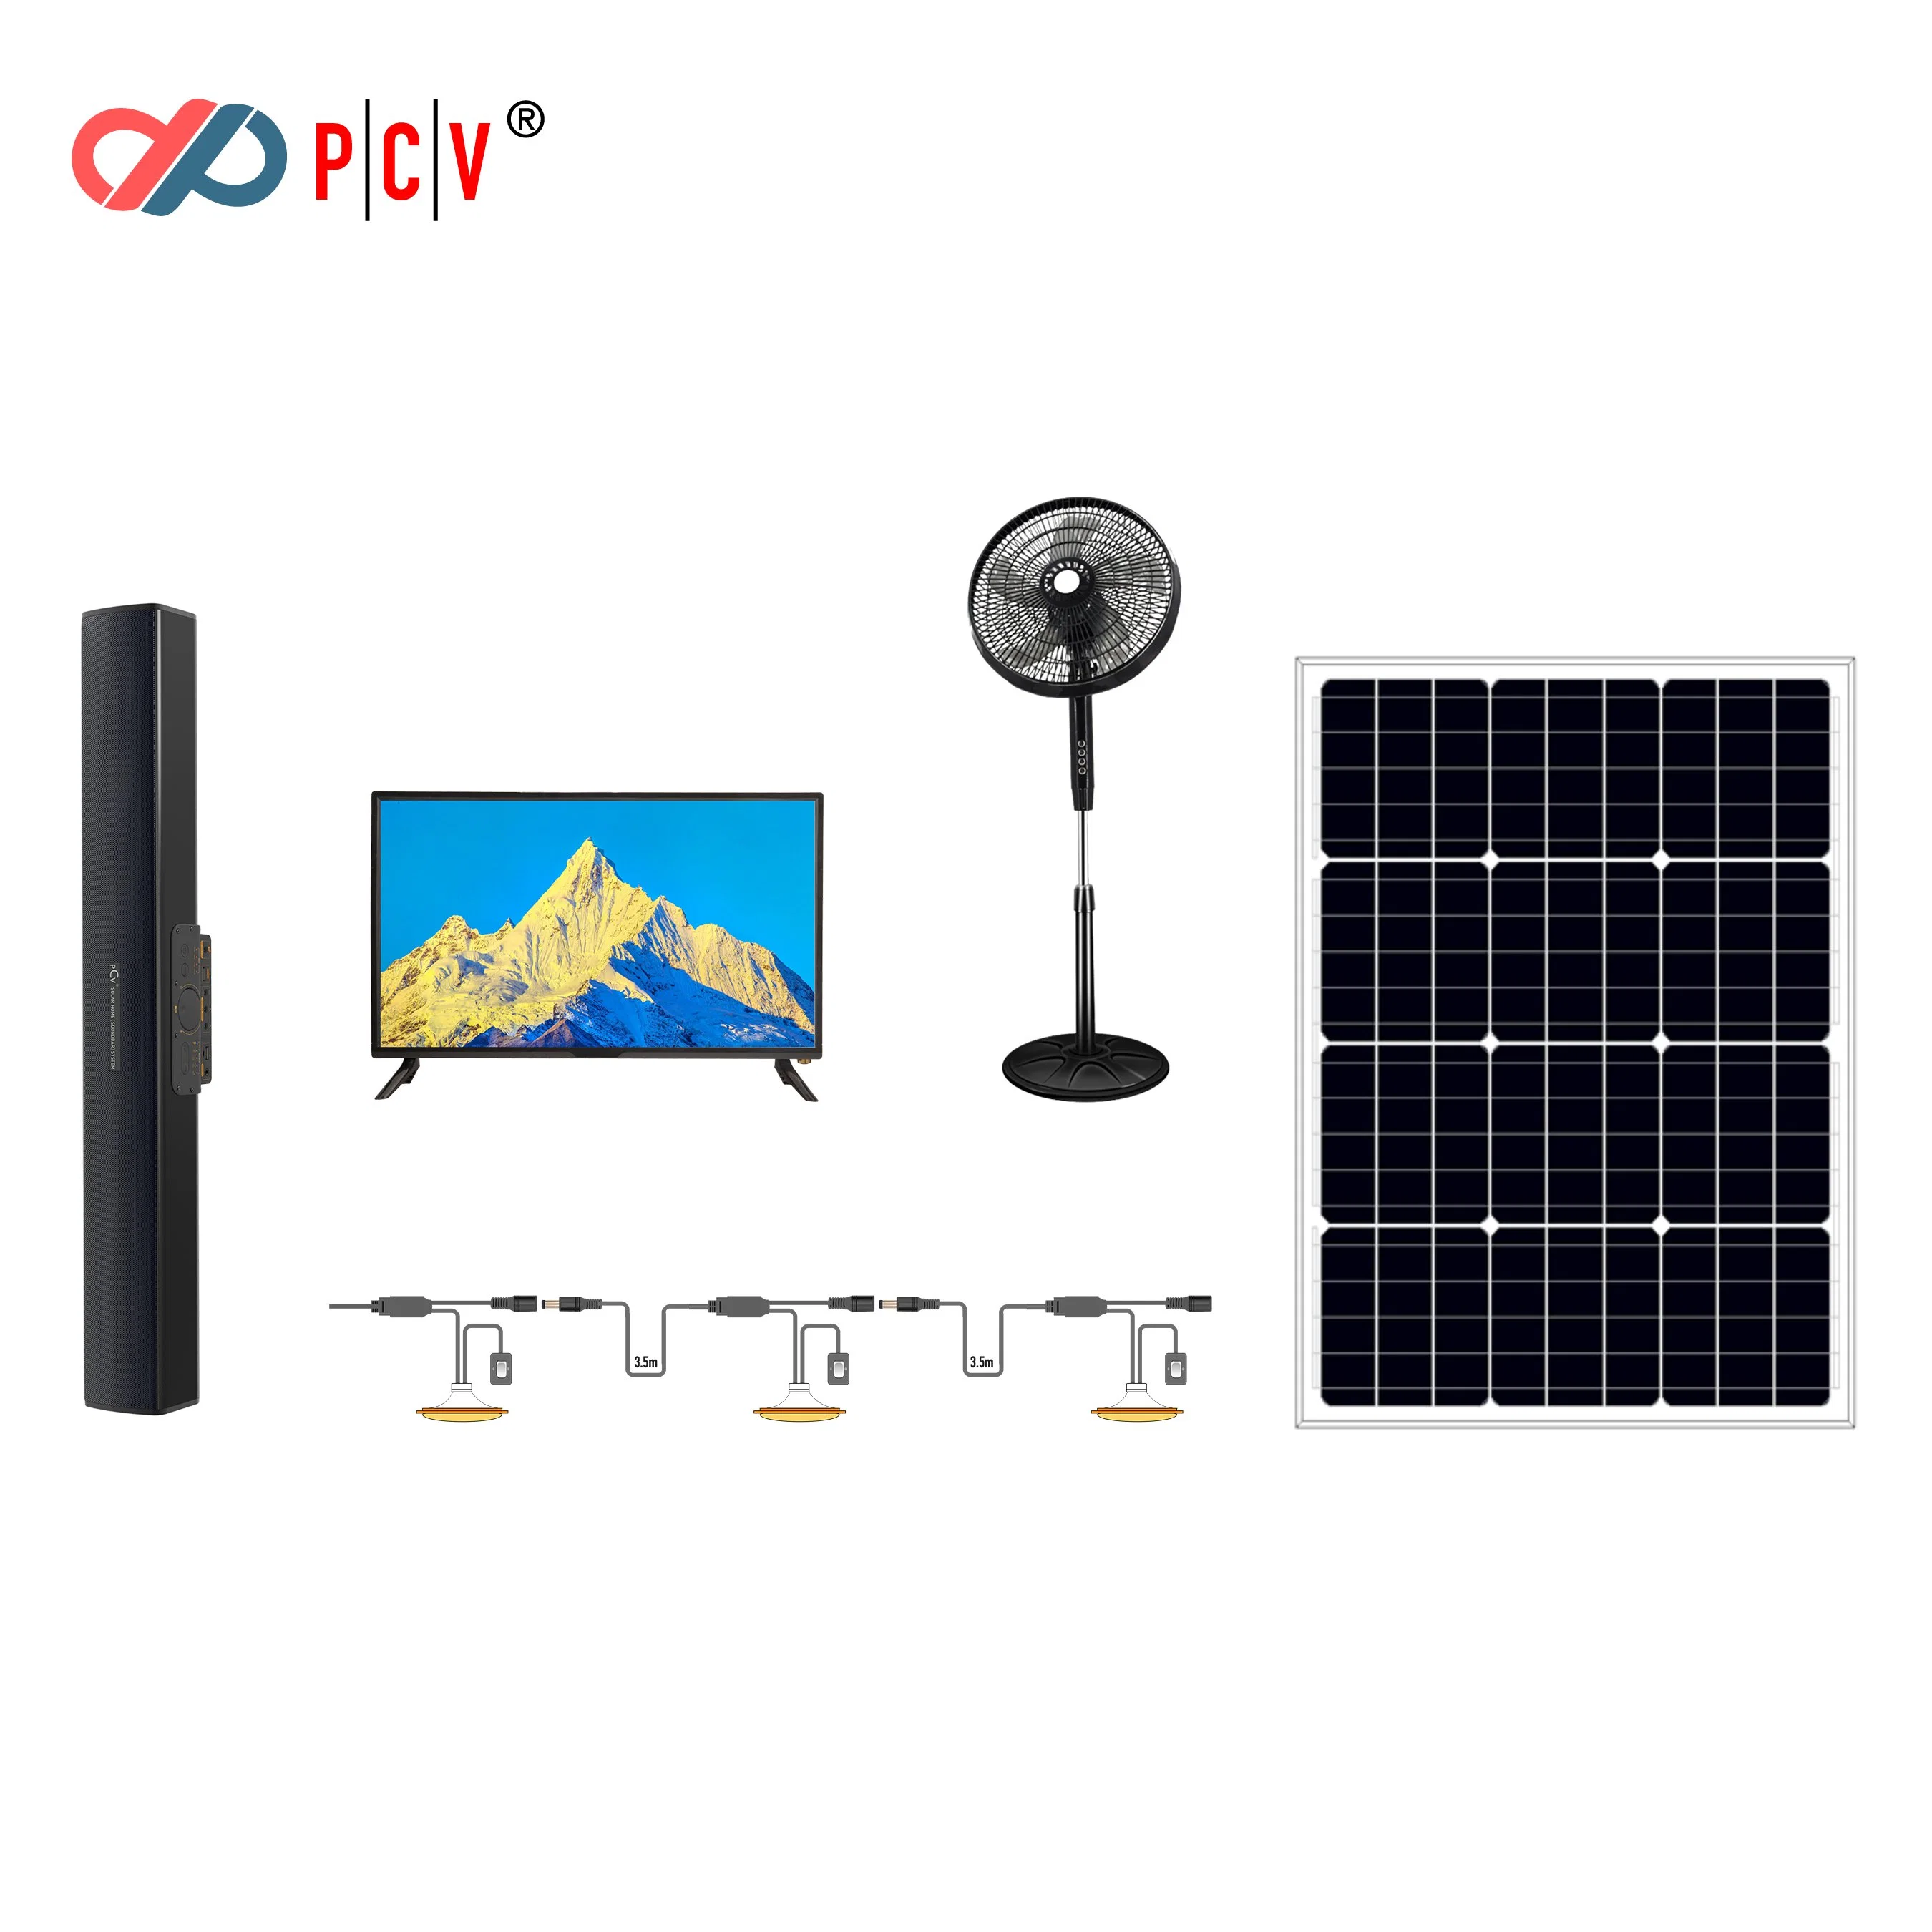 Portable Solar Speaker System Products Bluetooth Player Speakers Sound Box Loud Stereo Audio Portable Speakers